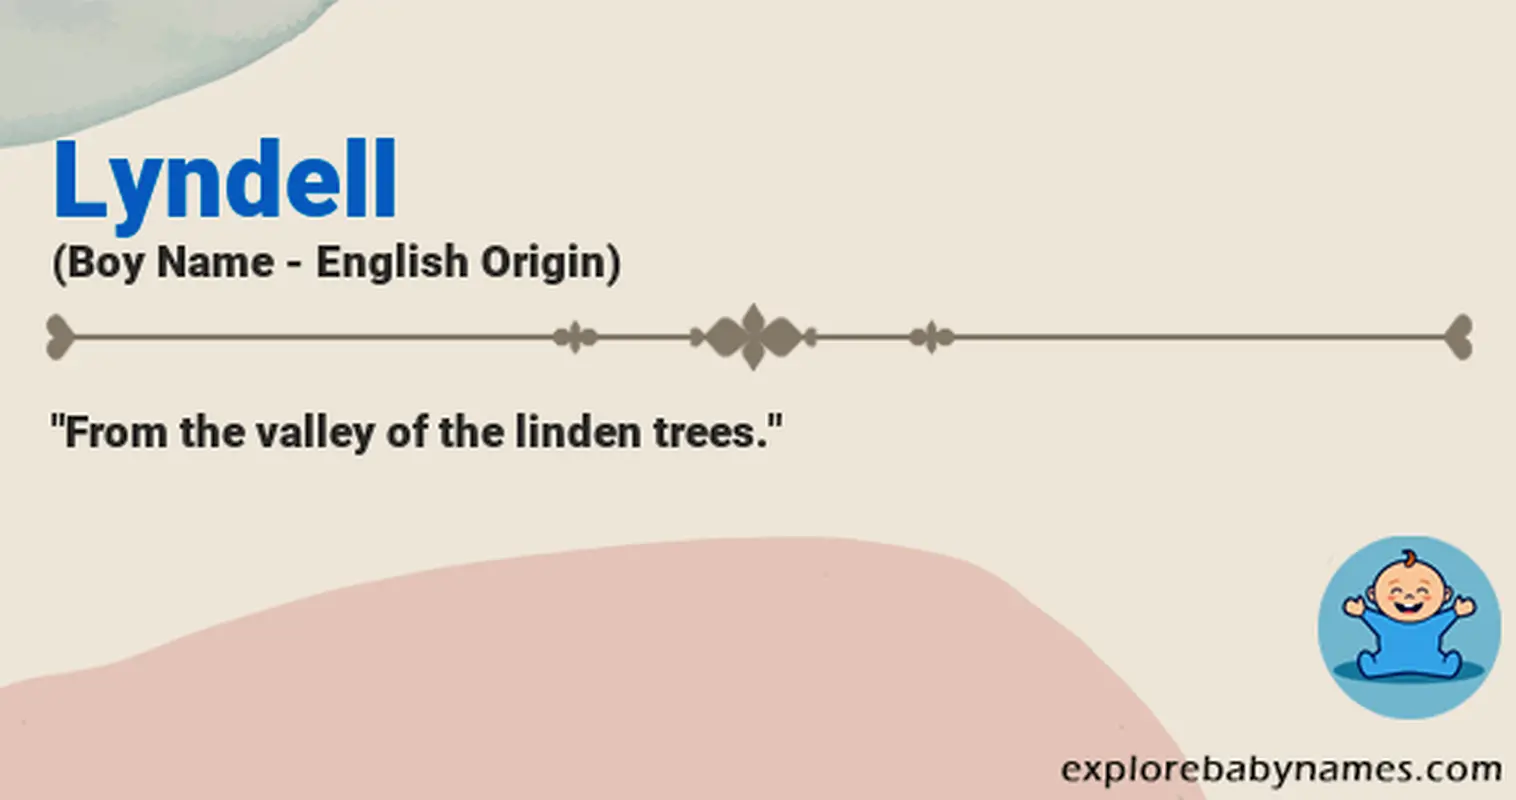 Meaning of Lyndell